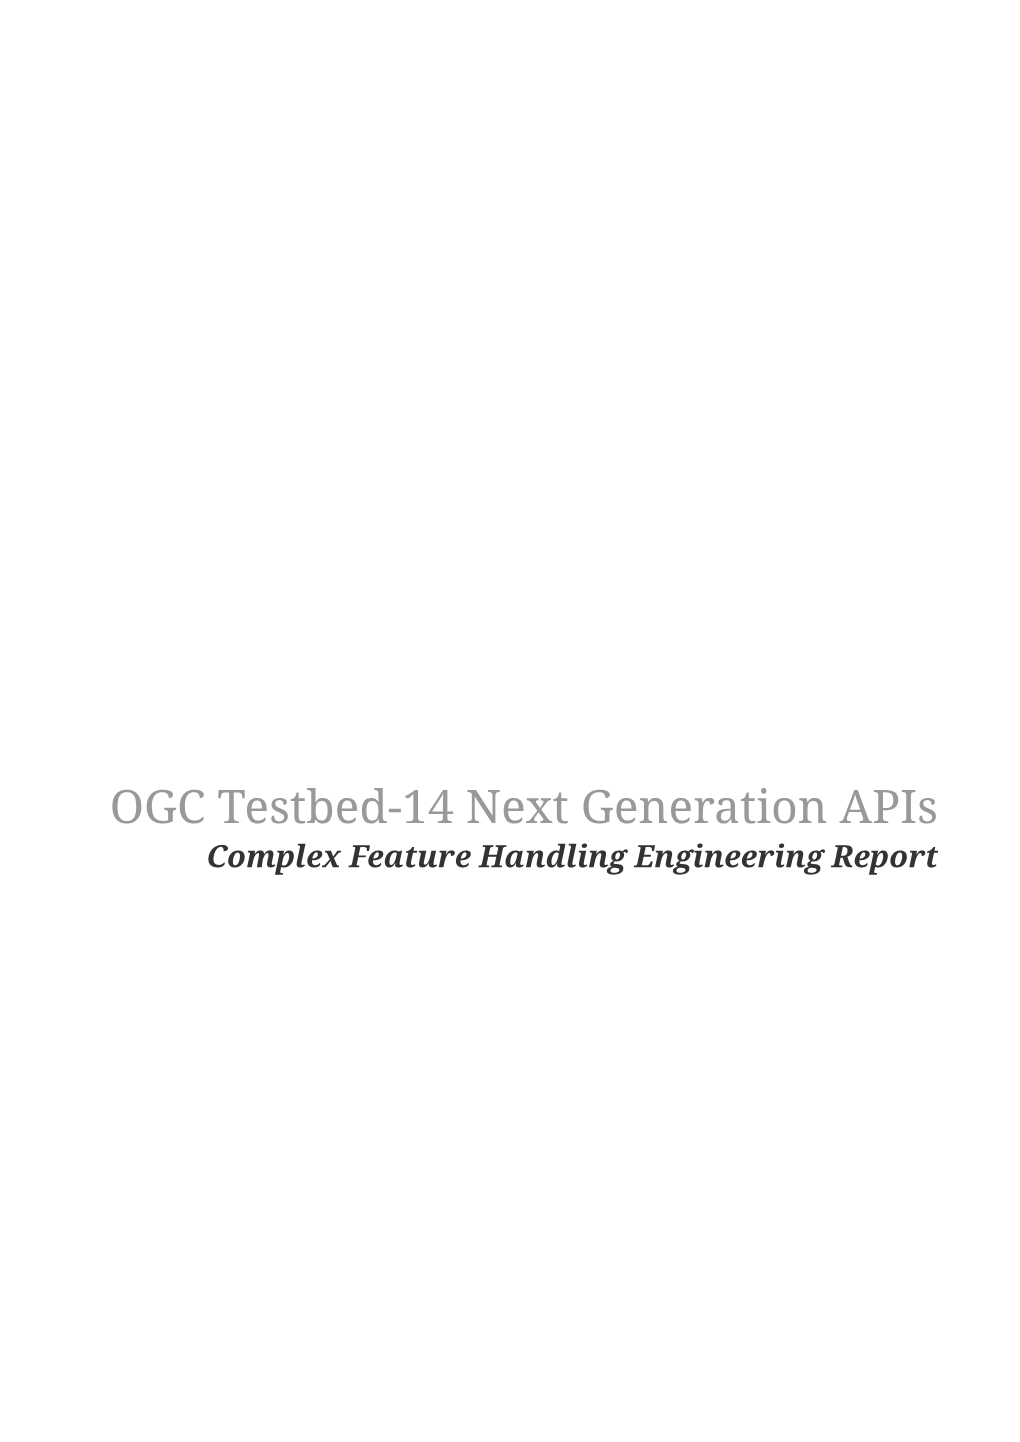 OGC Testbed-14 Next Generation Apis Complex Feature Handling Engineering Report Table of Contents